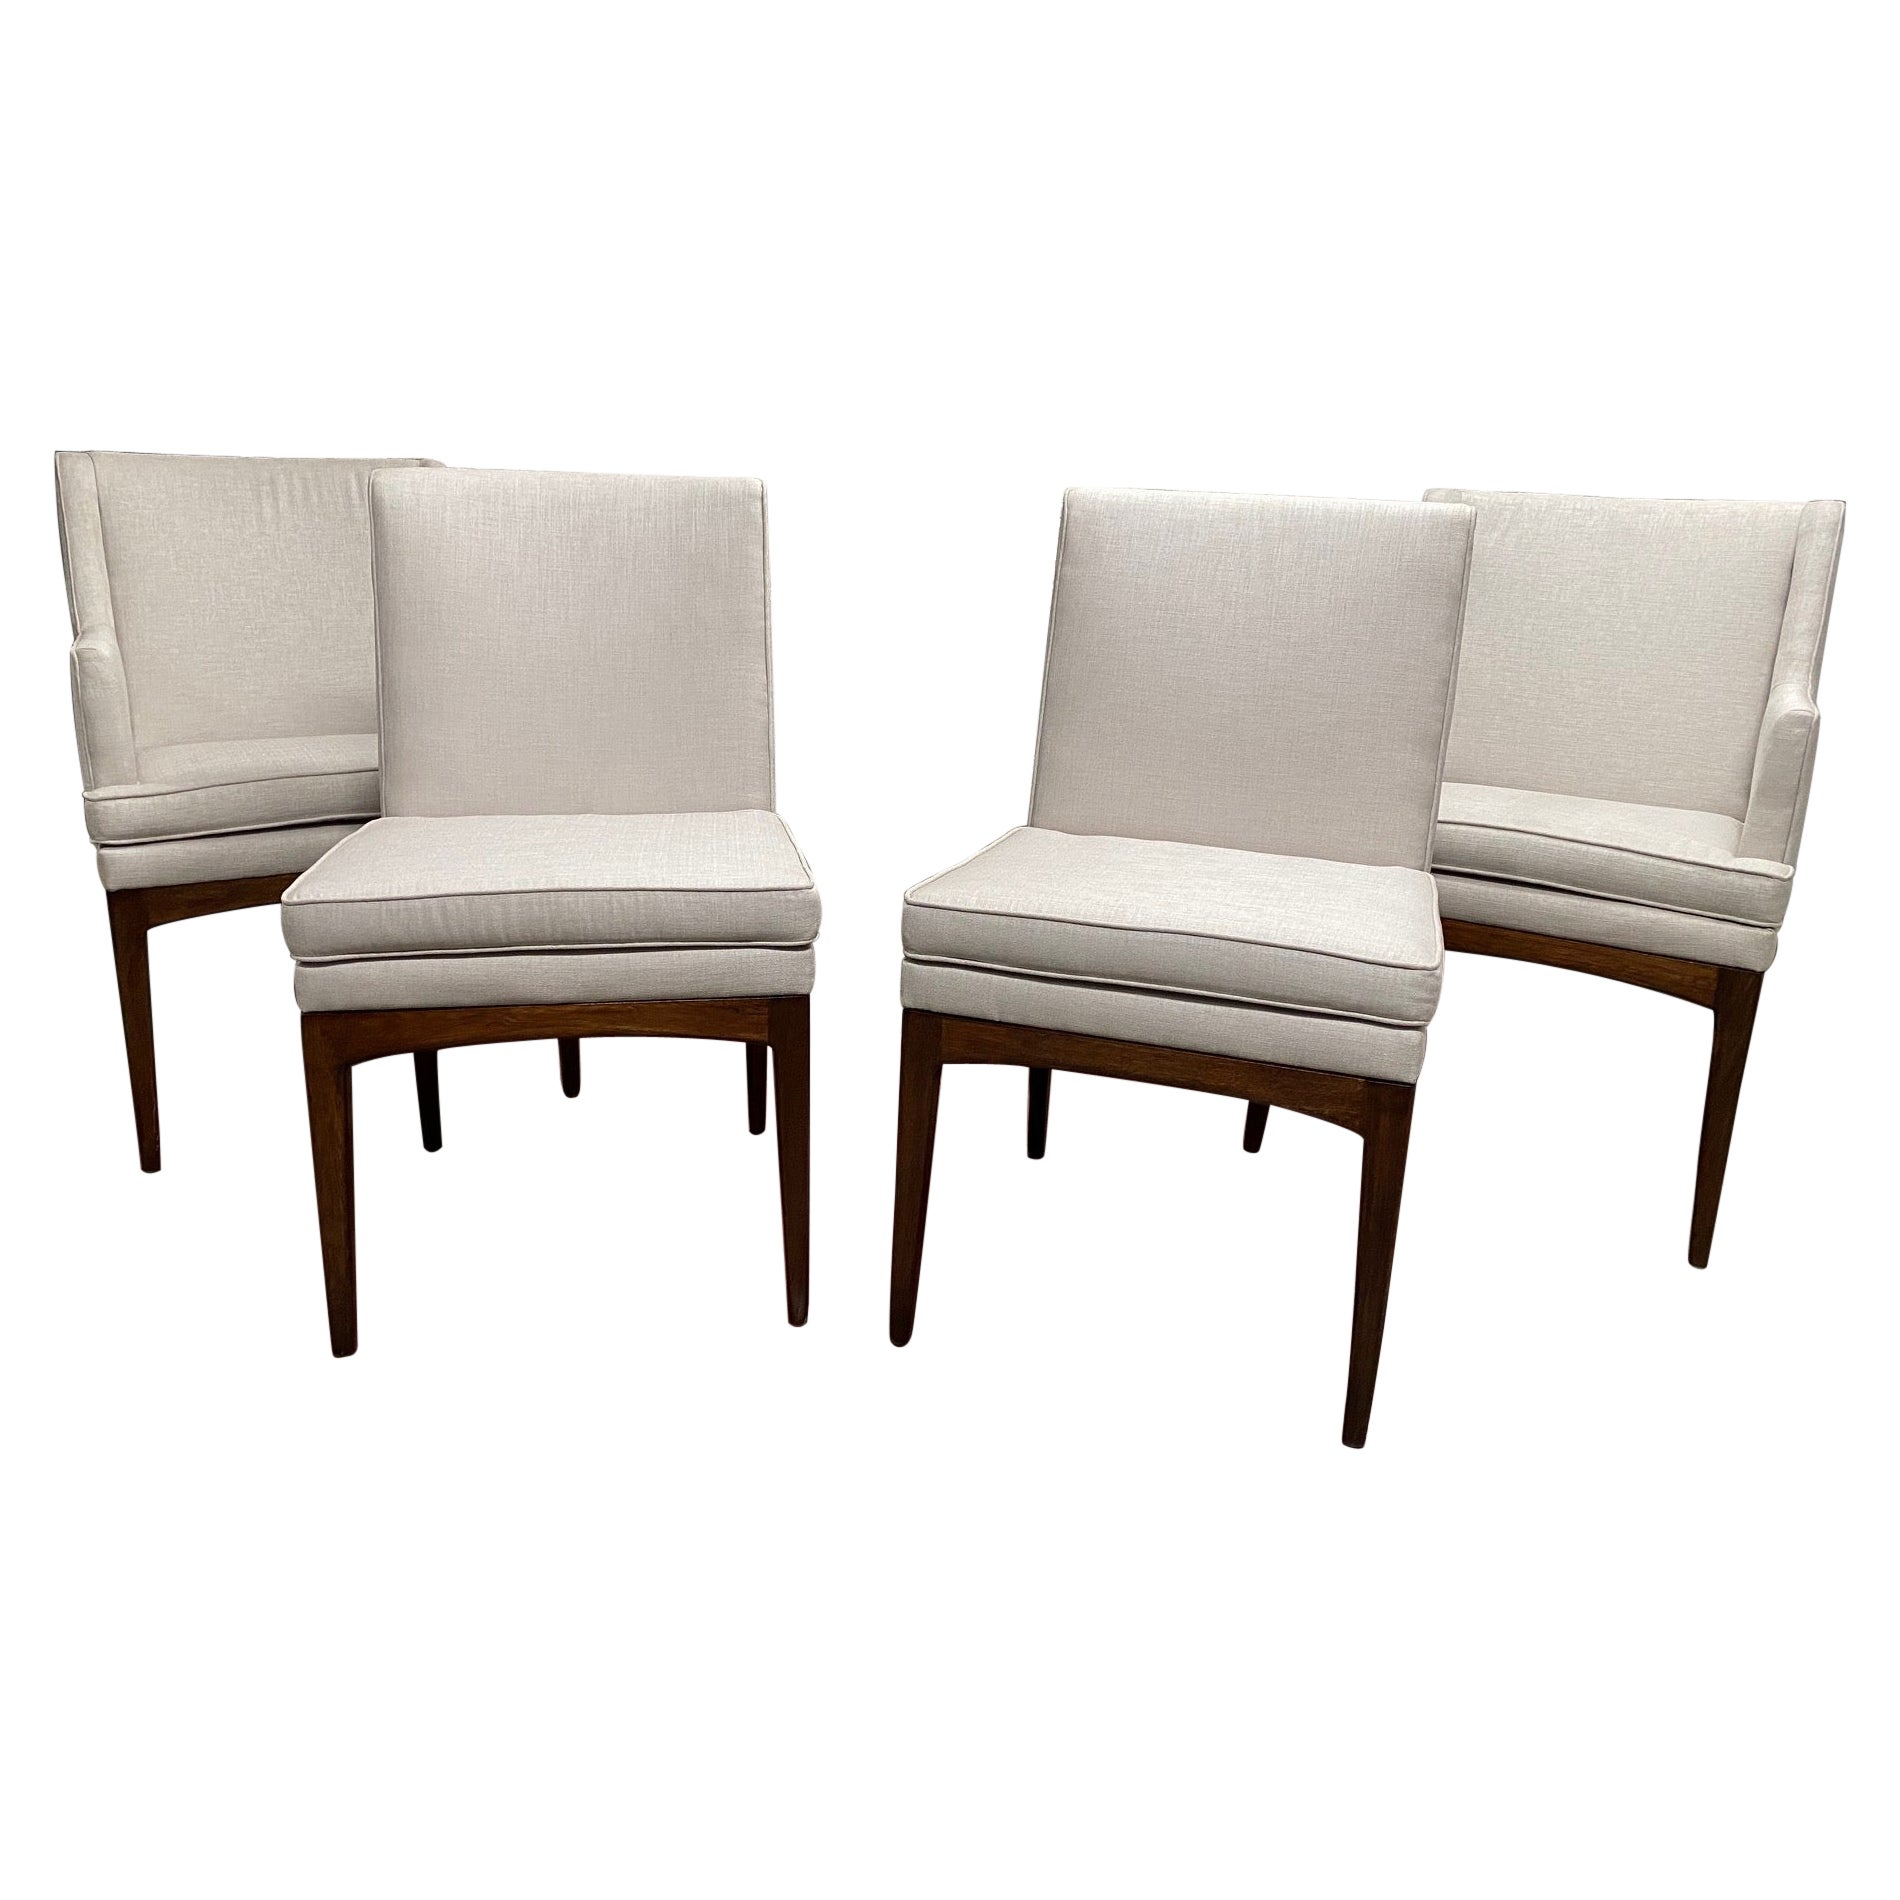  Set of Four Modernist Walnut and Upholstered Dining Chairs by Flair Furniture